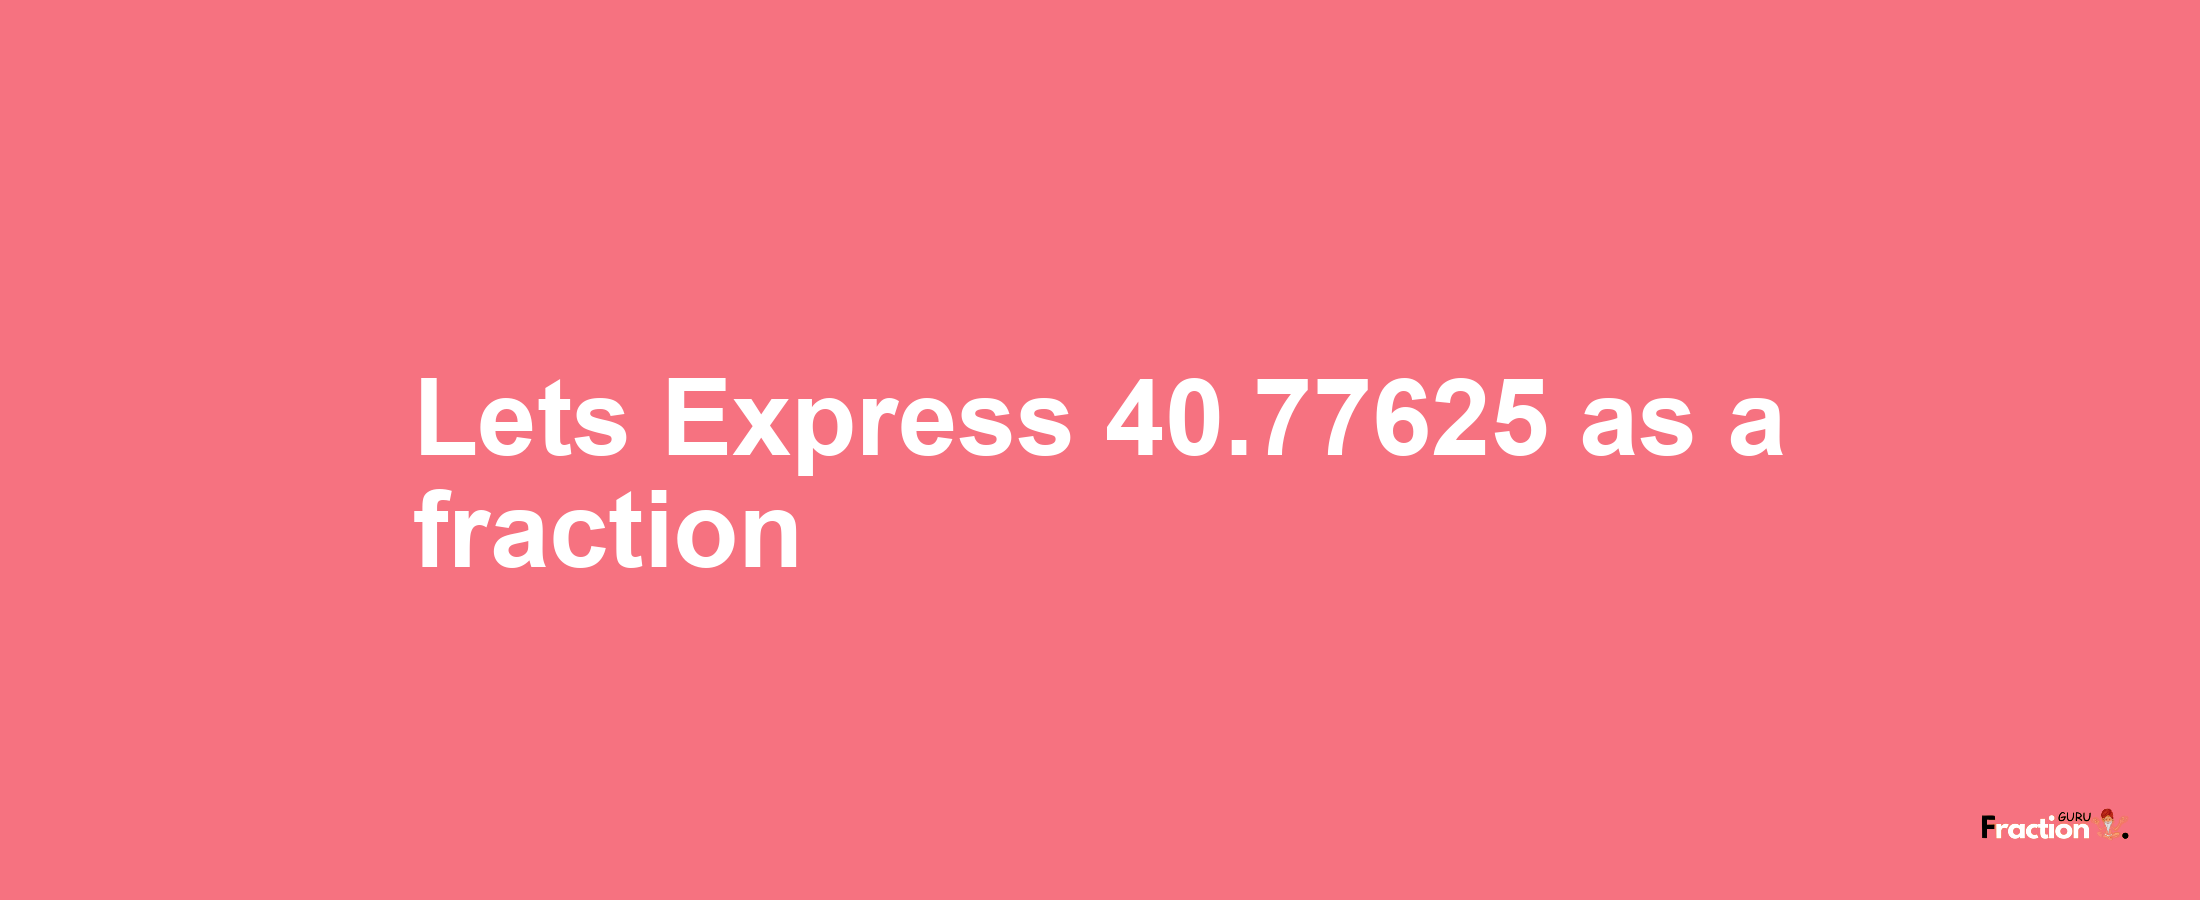 Lets Express 40.77625 as afraction